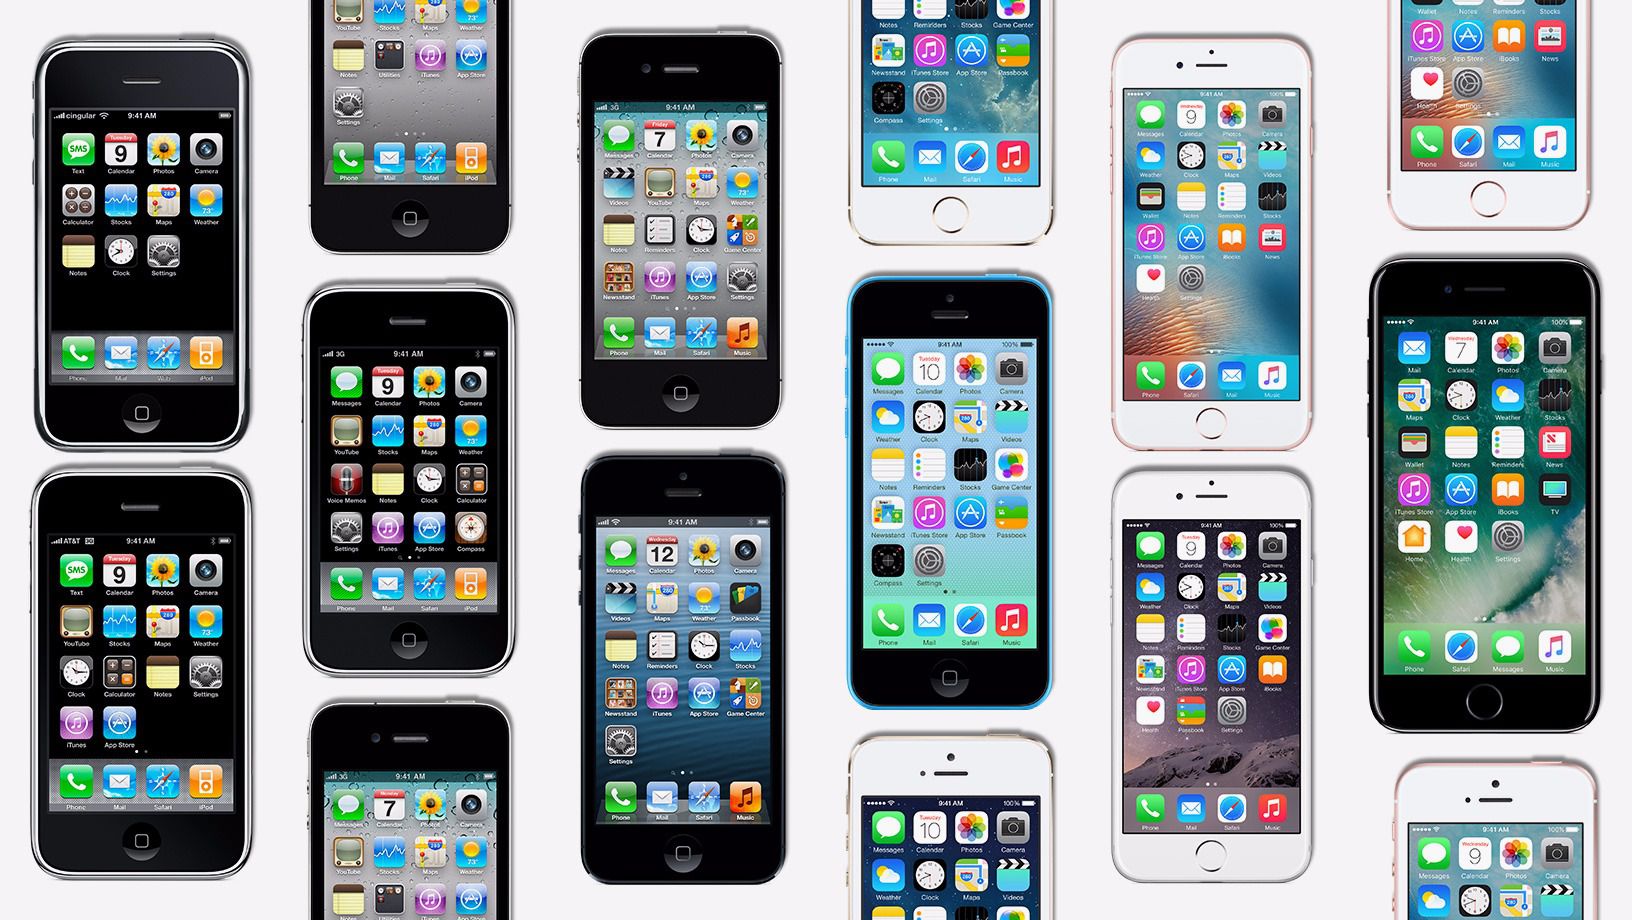 Apple has acknowledged that it intentionally slows the speed of the old iPhone